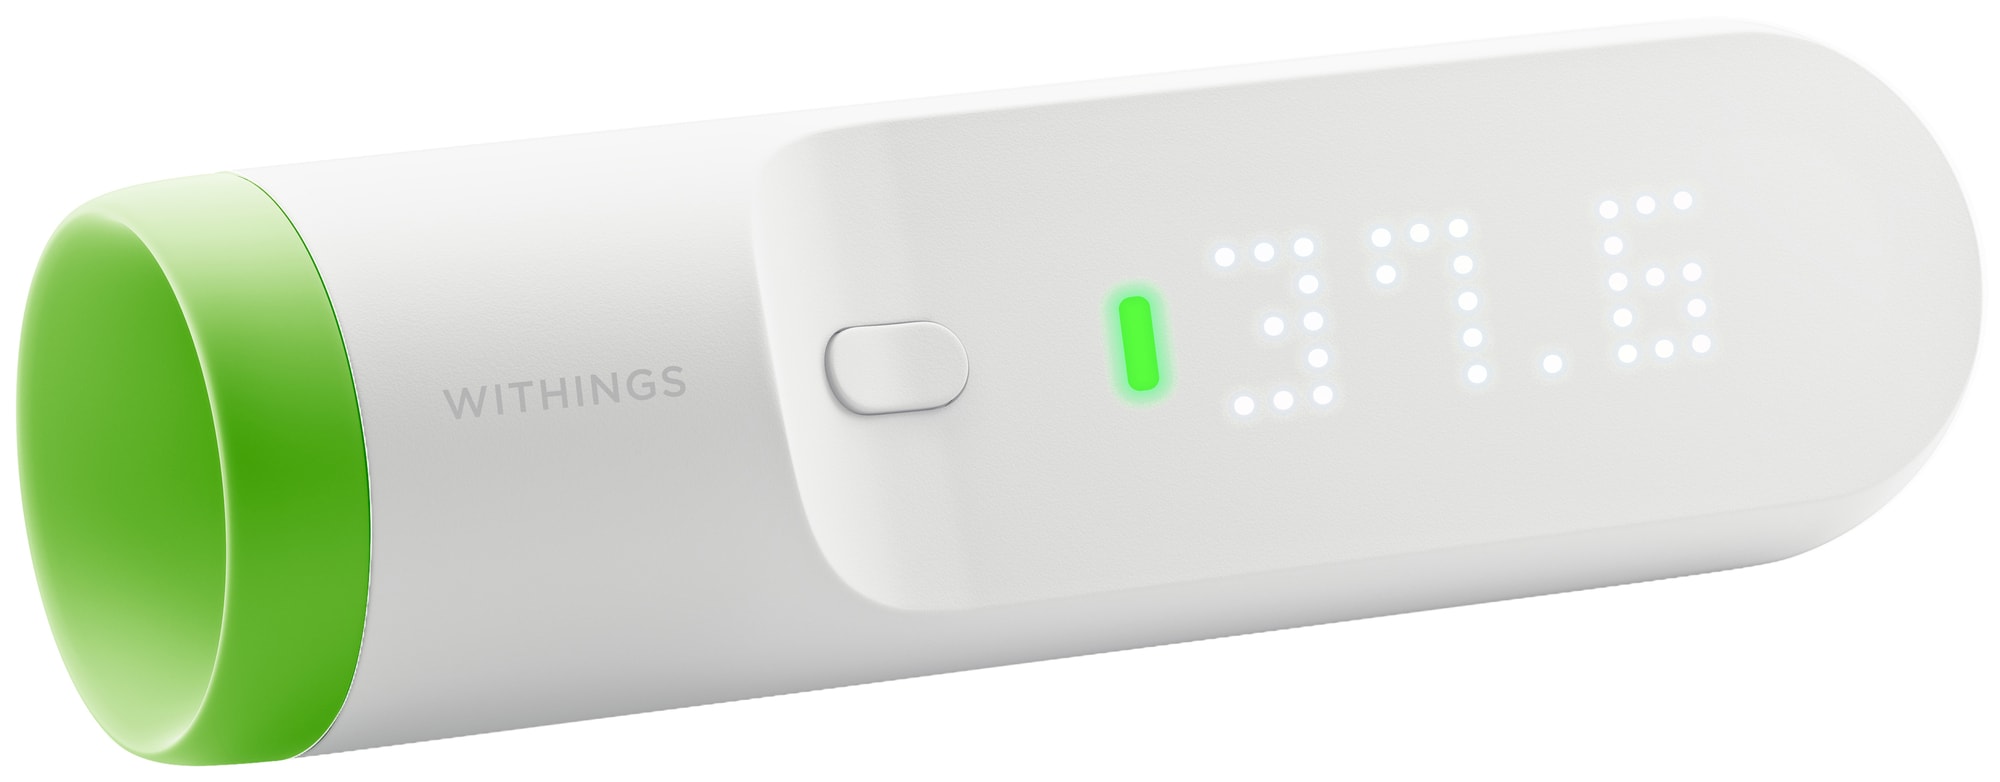 Withings Thermo termometer WITSCT1